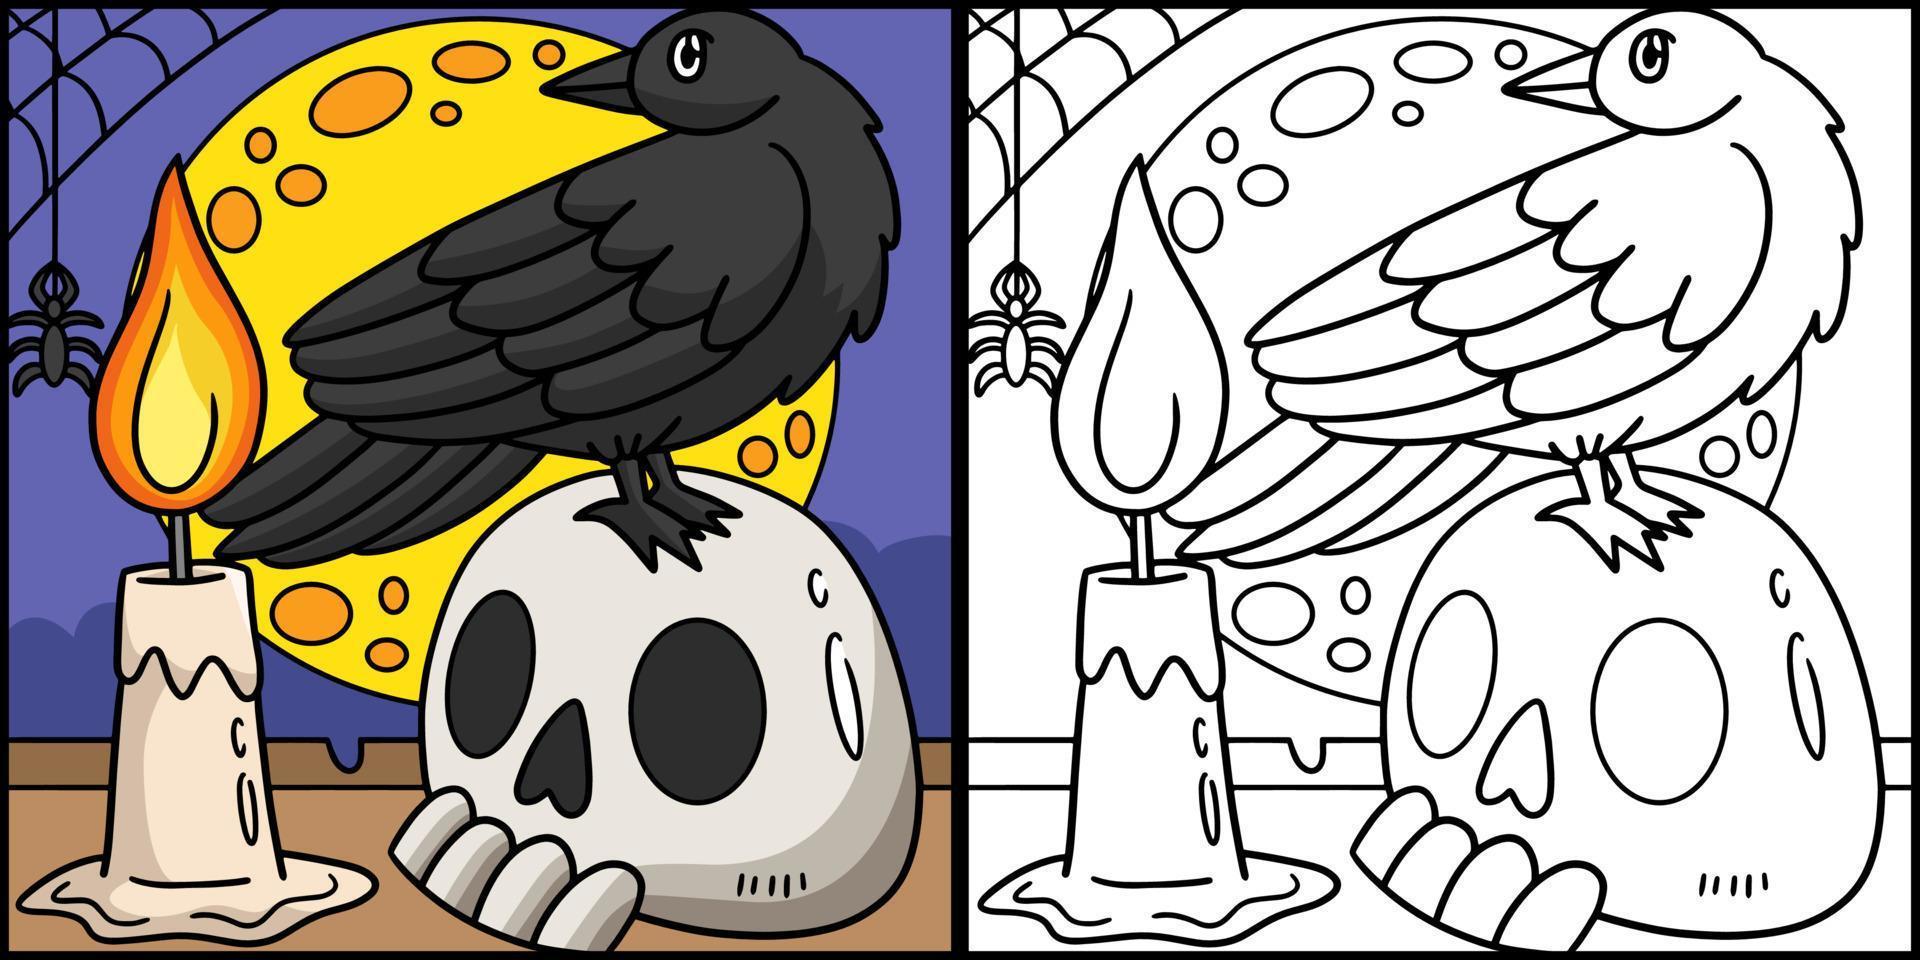 Crows Halloween Coloring Page Colored Illustration vector